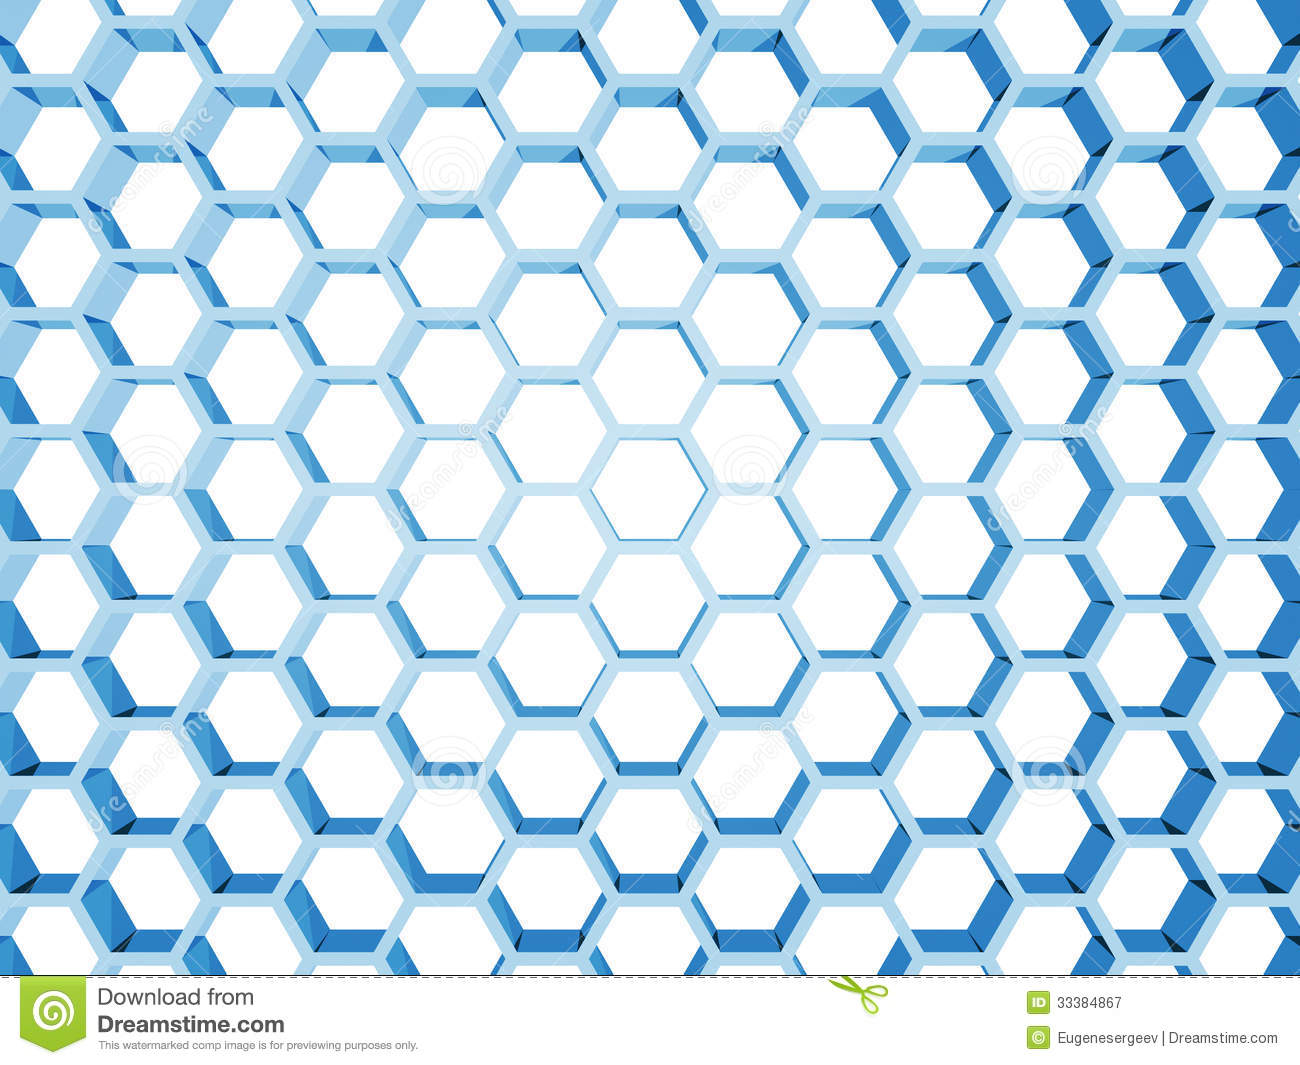 Honeycomb structure clipart - Clipground